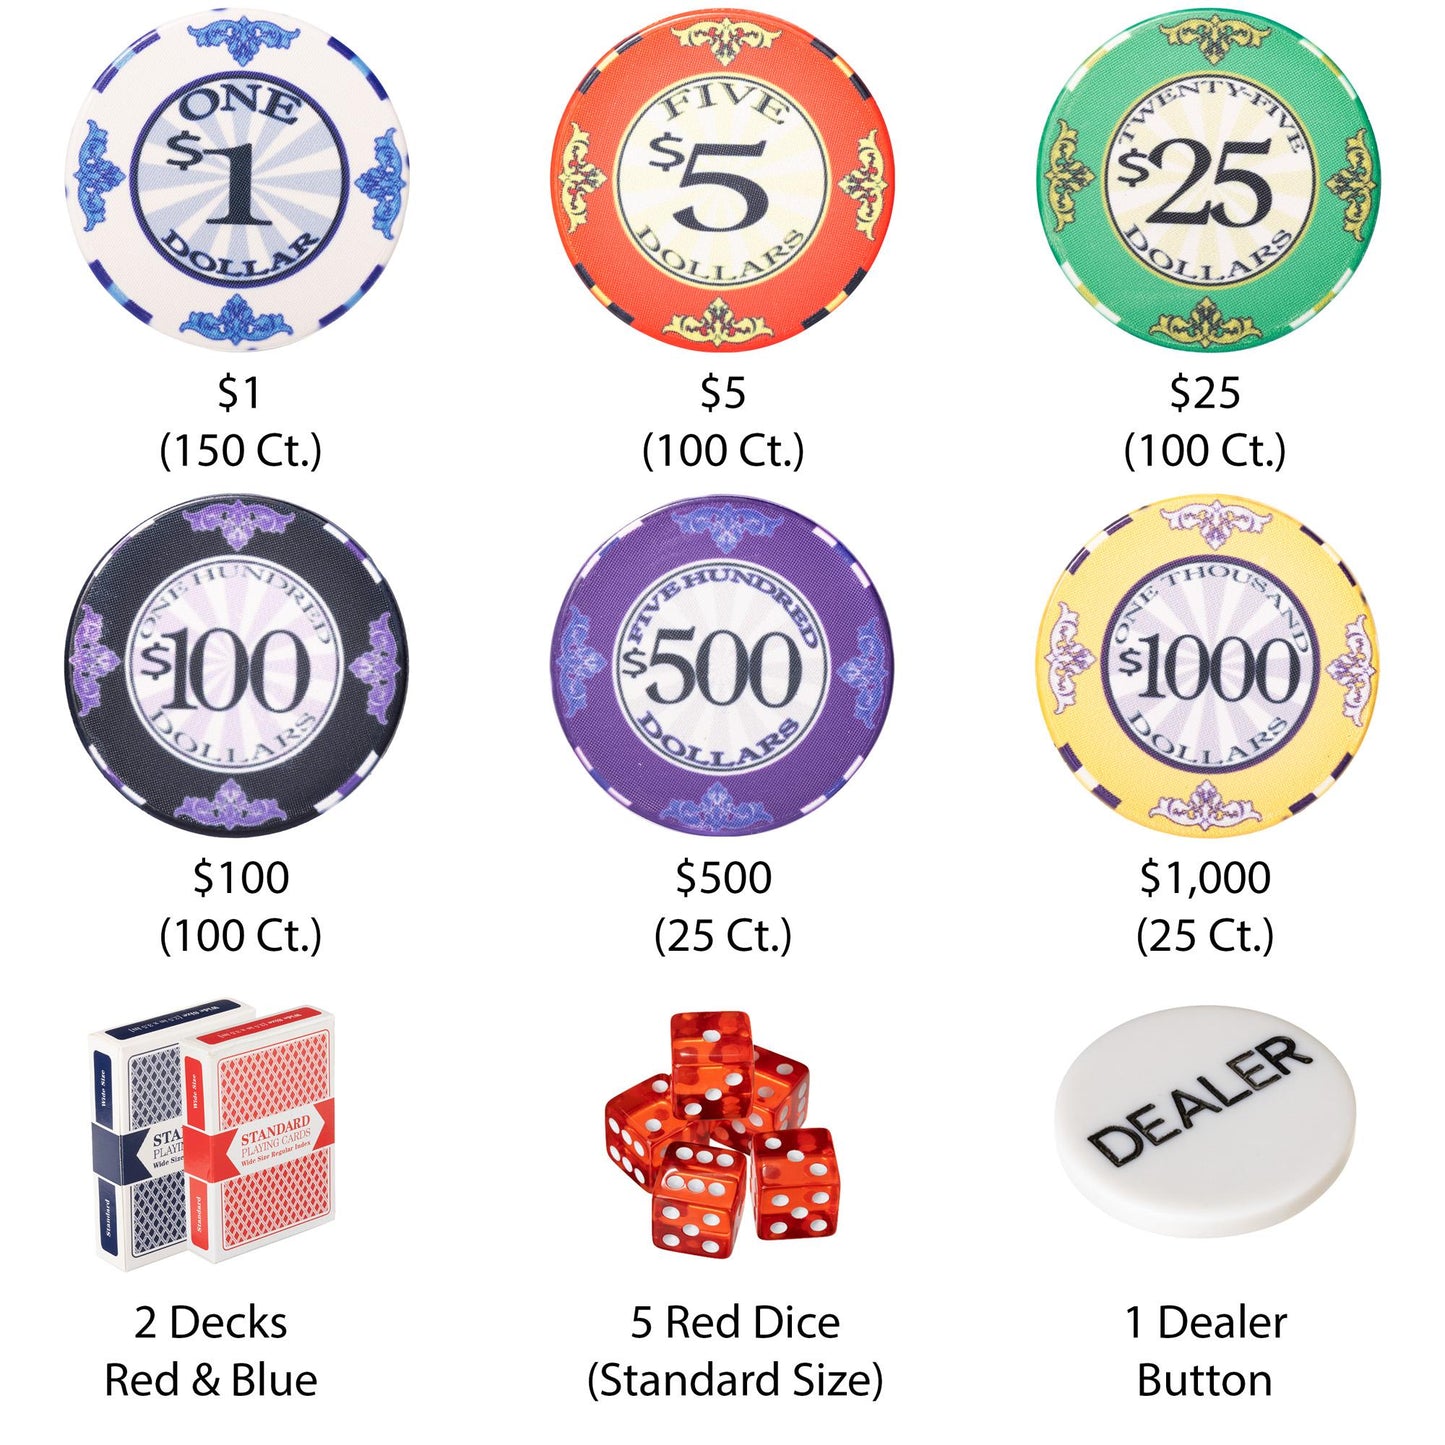 500 Scroll Poker Chips with Aluminum Case